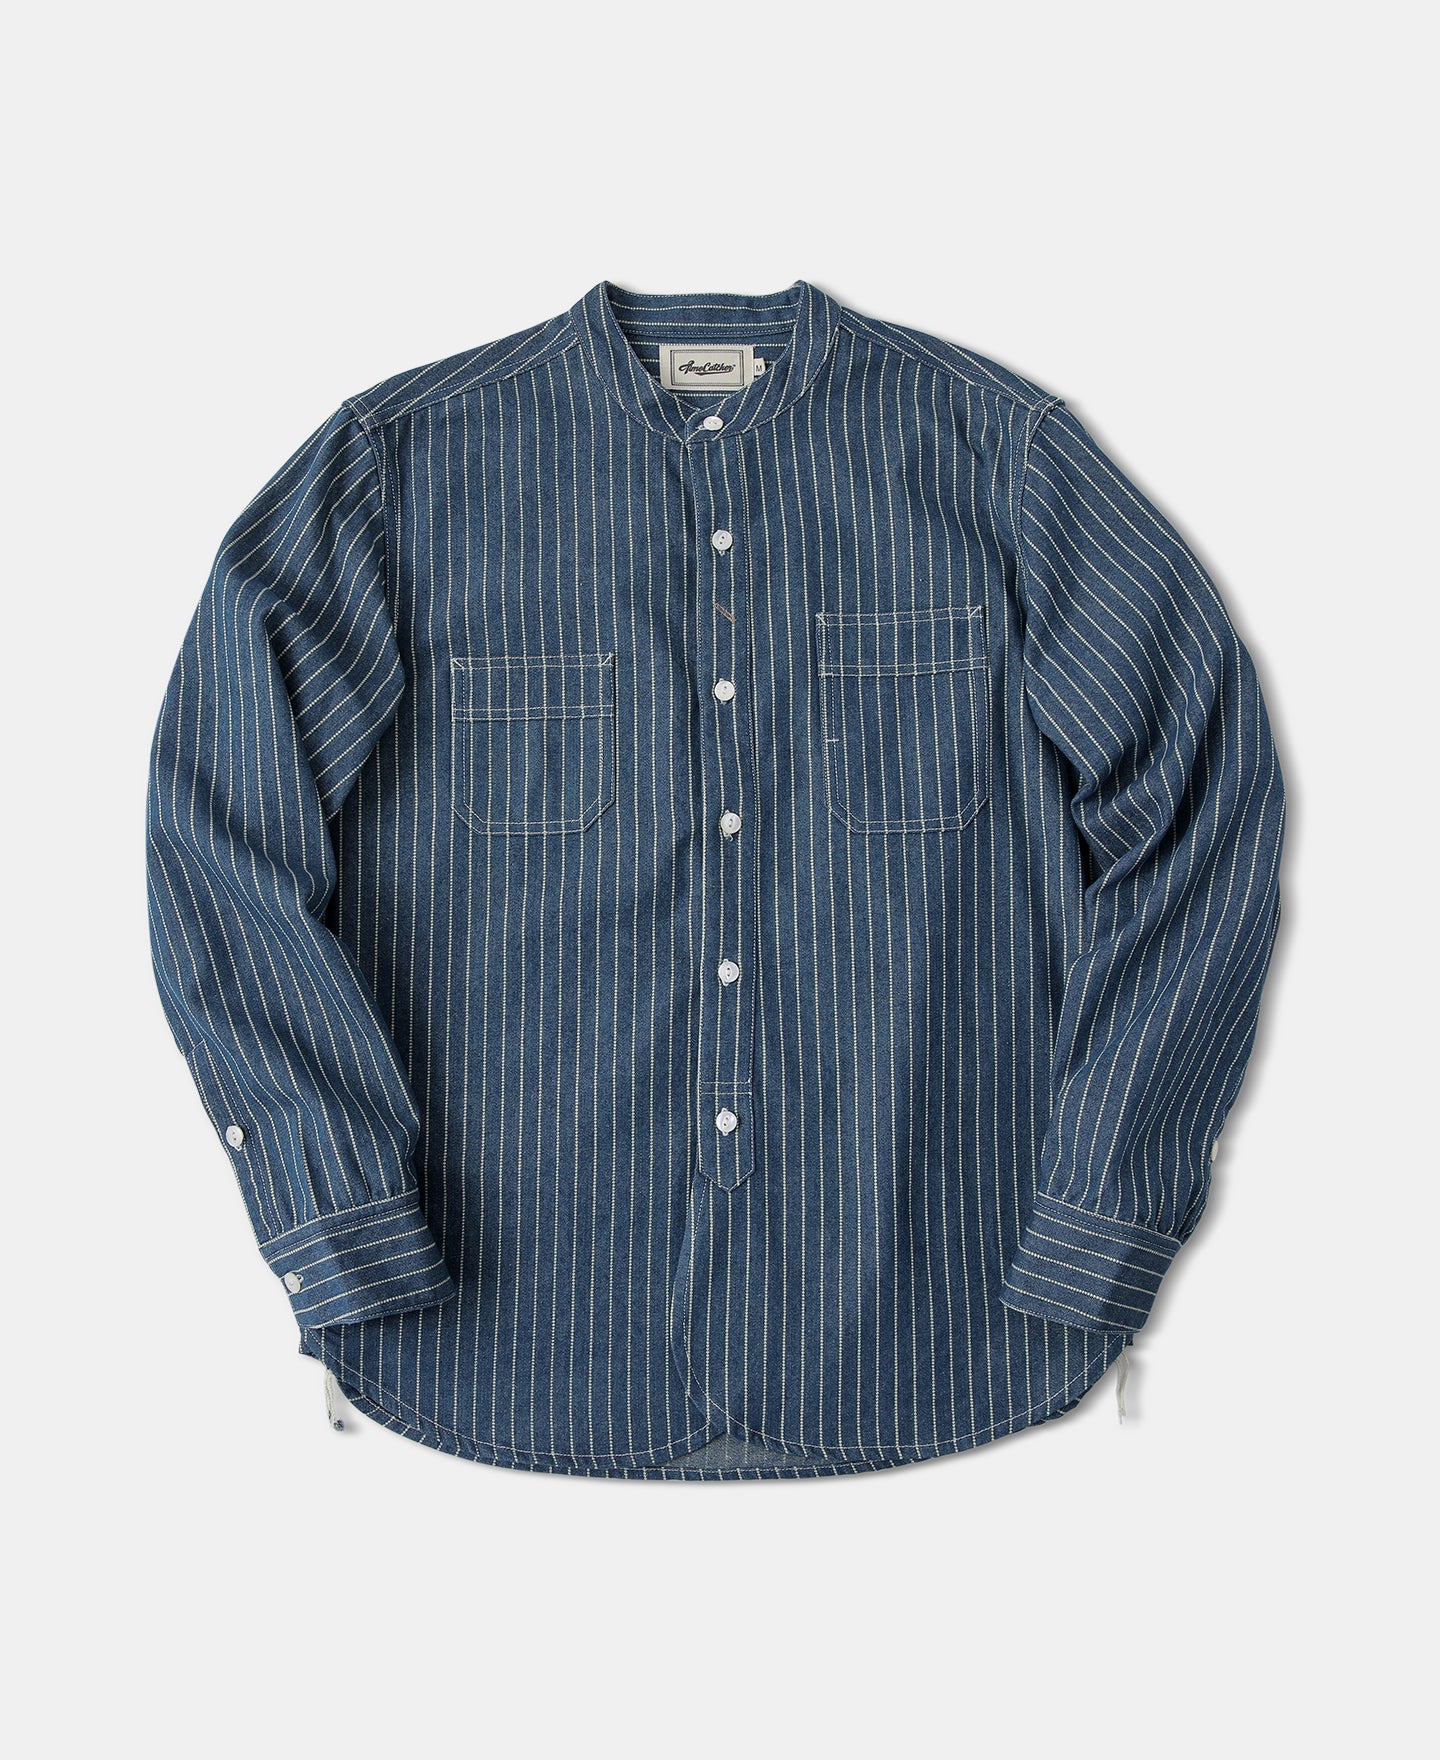 Buying Guide to Heritage Work Shirts (Chambray, Wabash, Hickory)